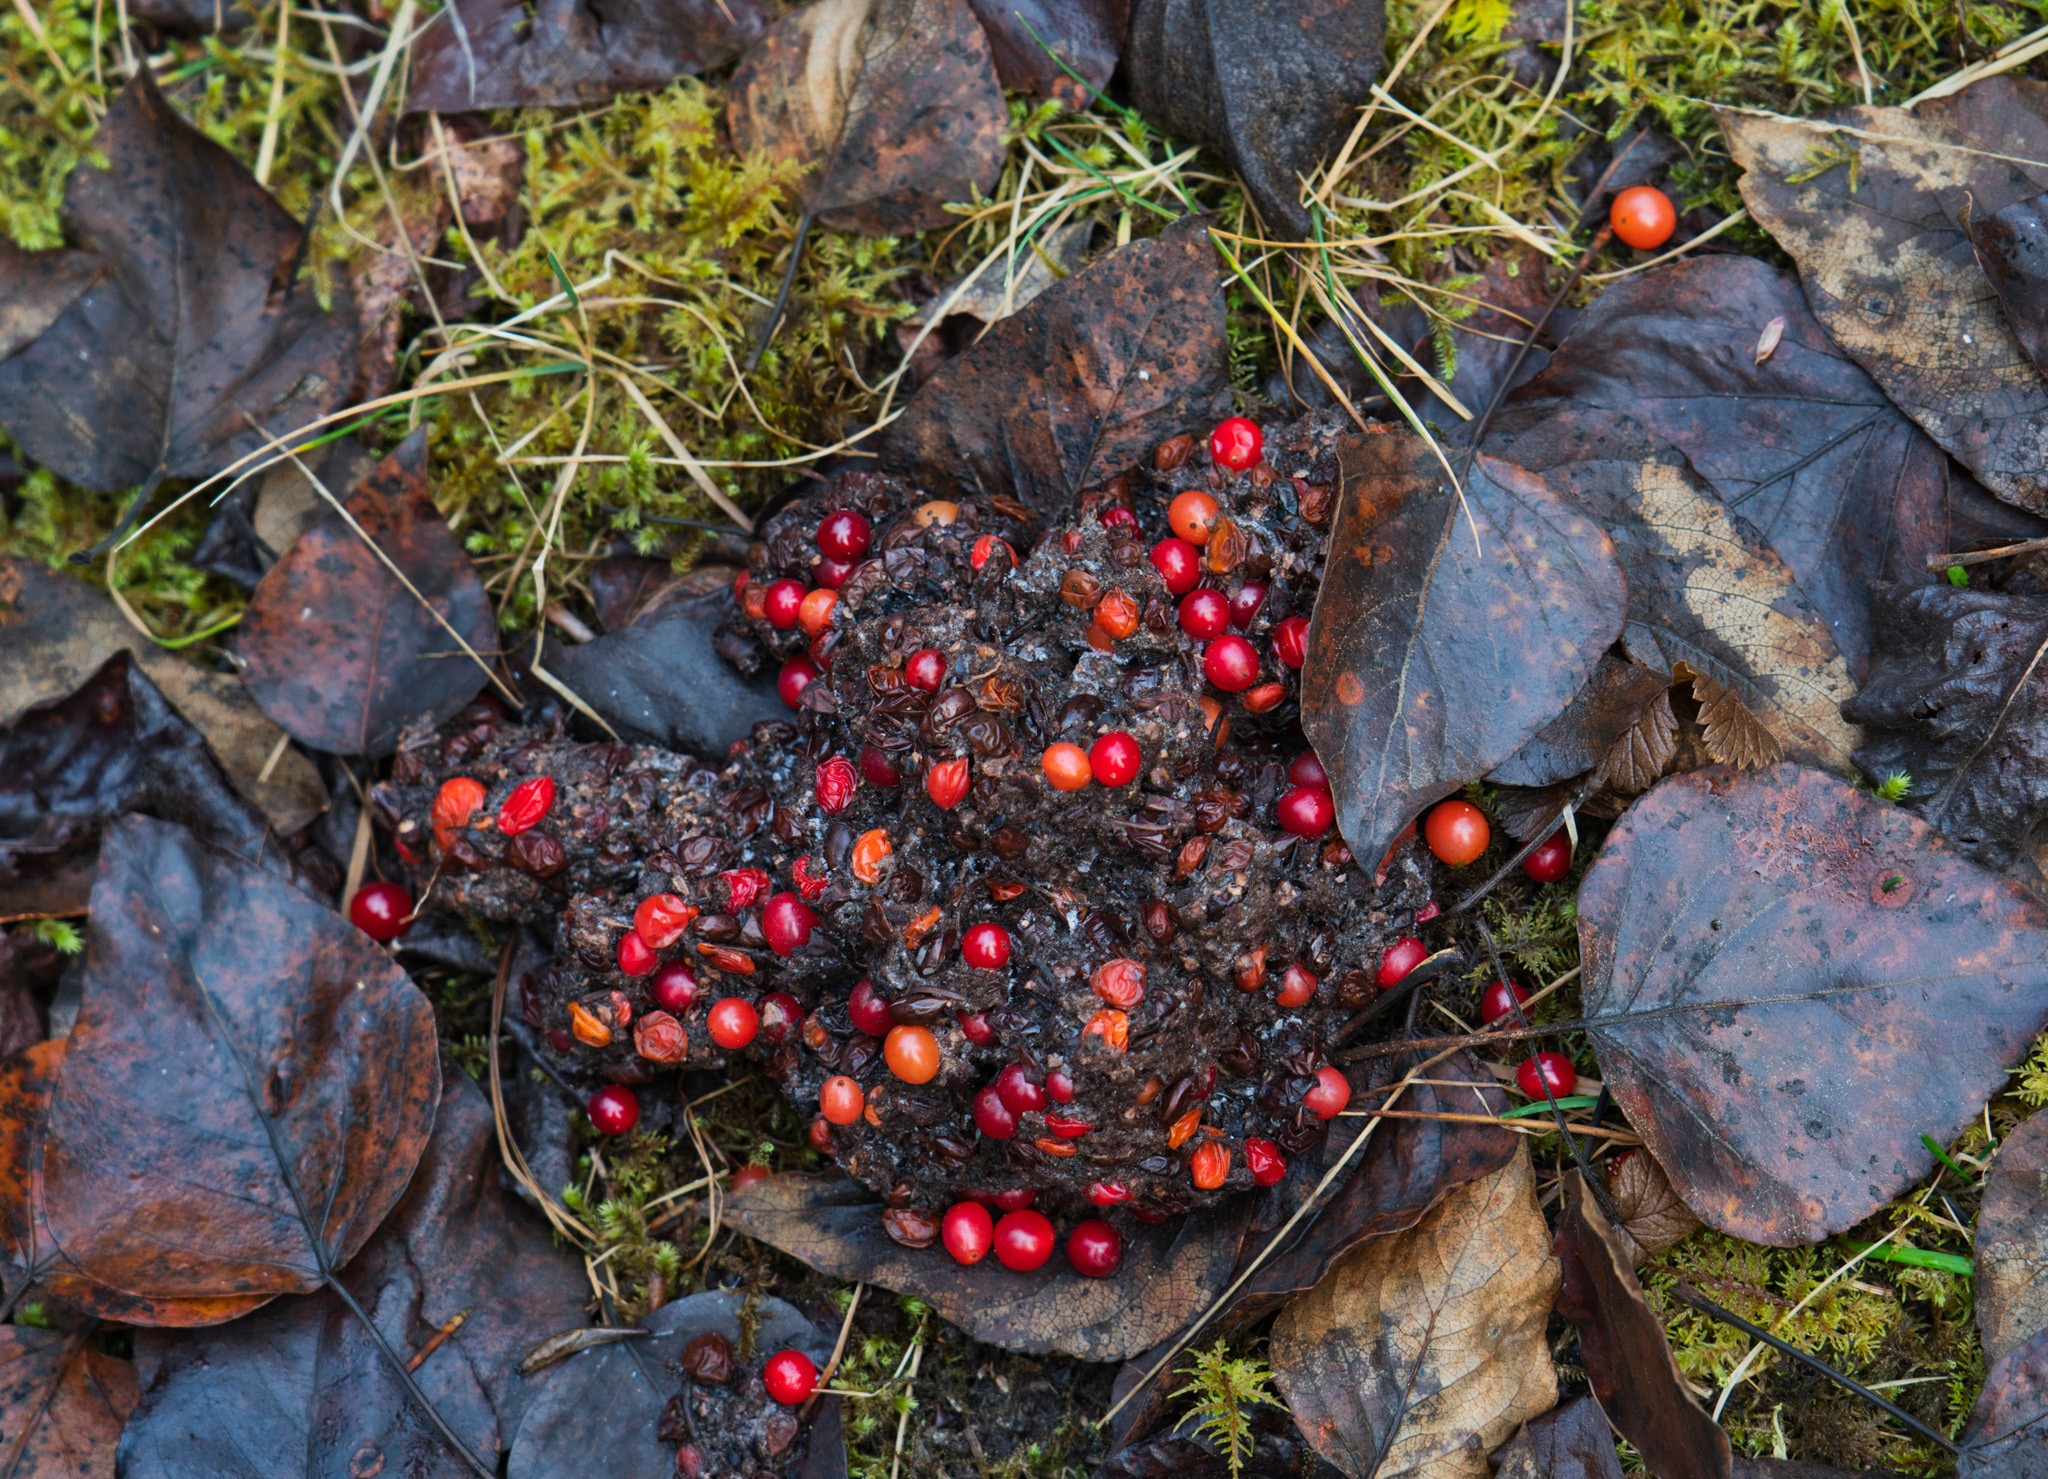 Bear scat is full of whole berries.